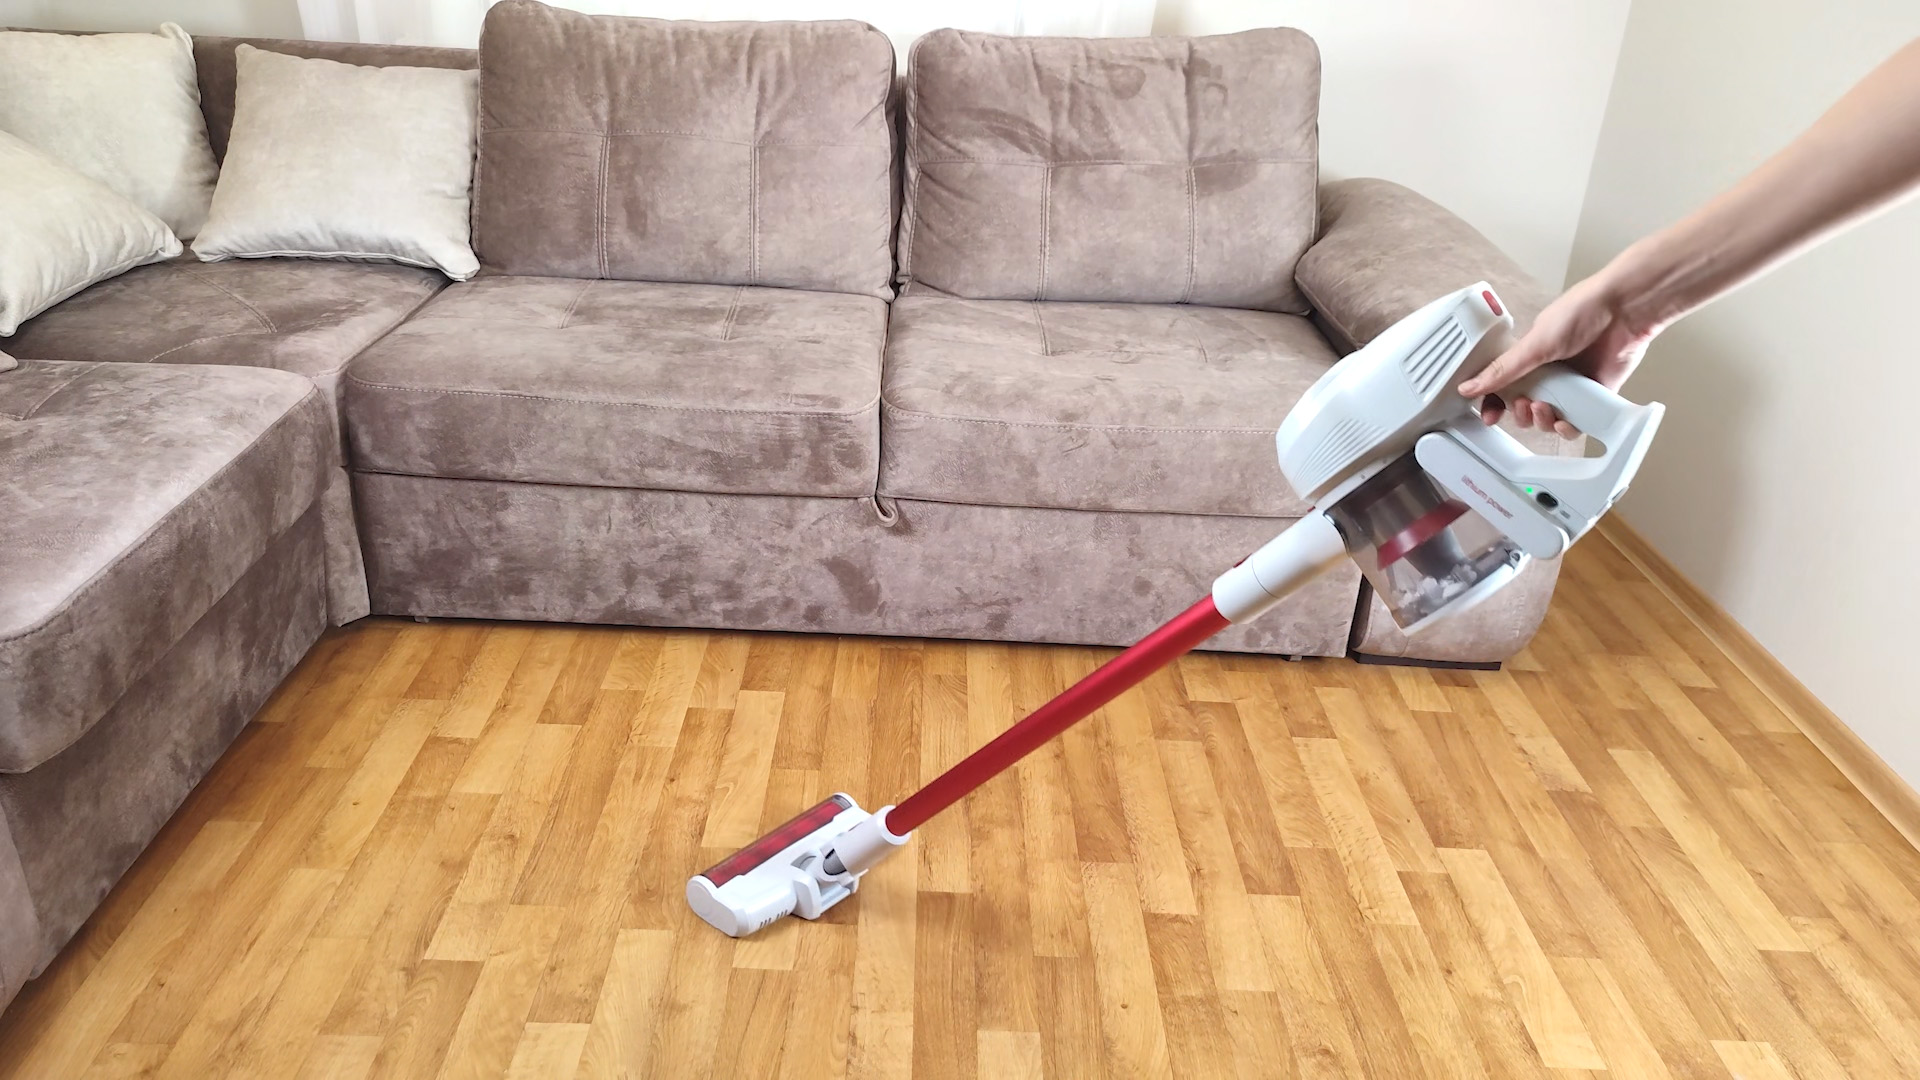 Jimmy JV51 cordless vacuum cleaner review - view